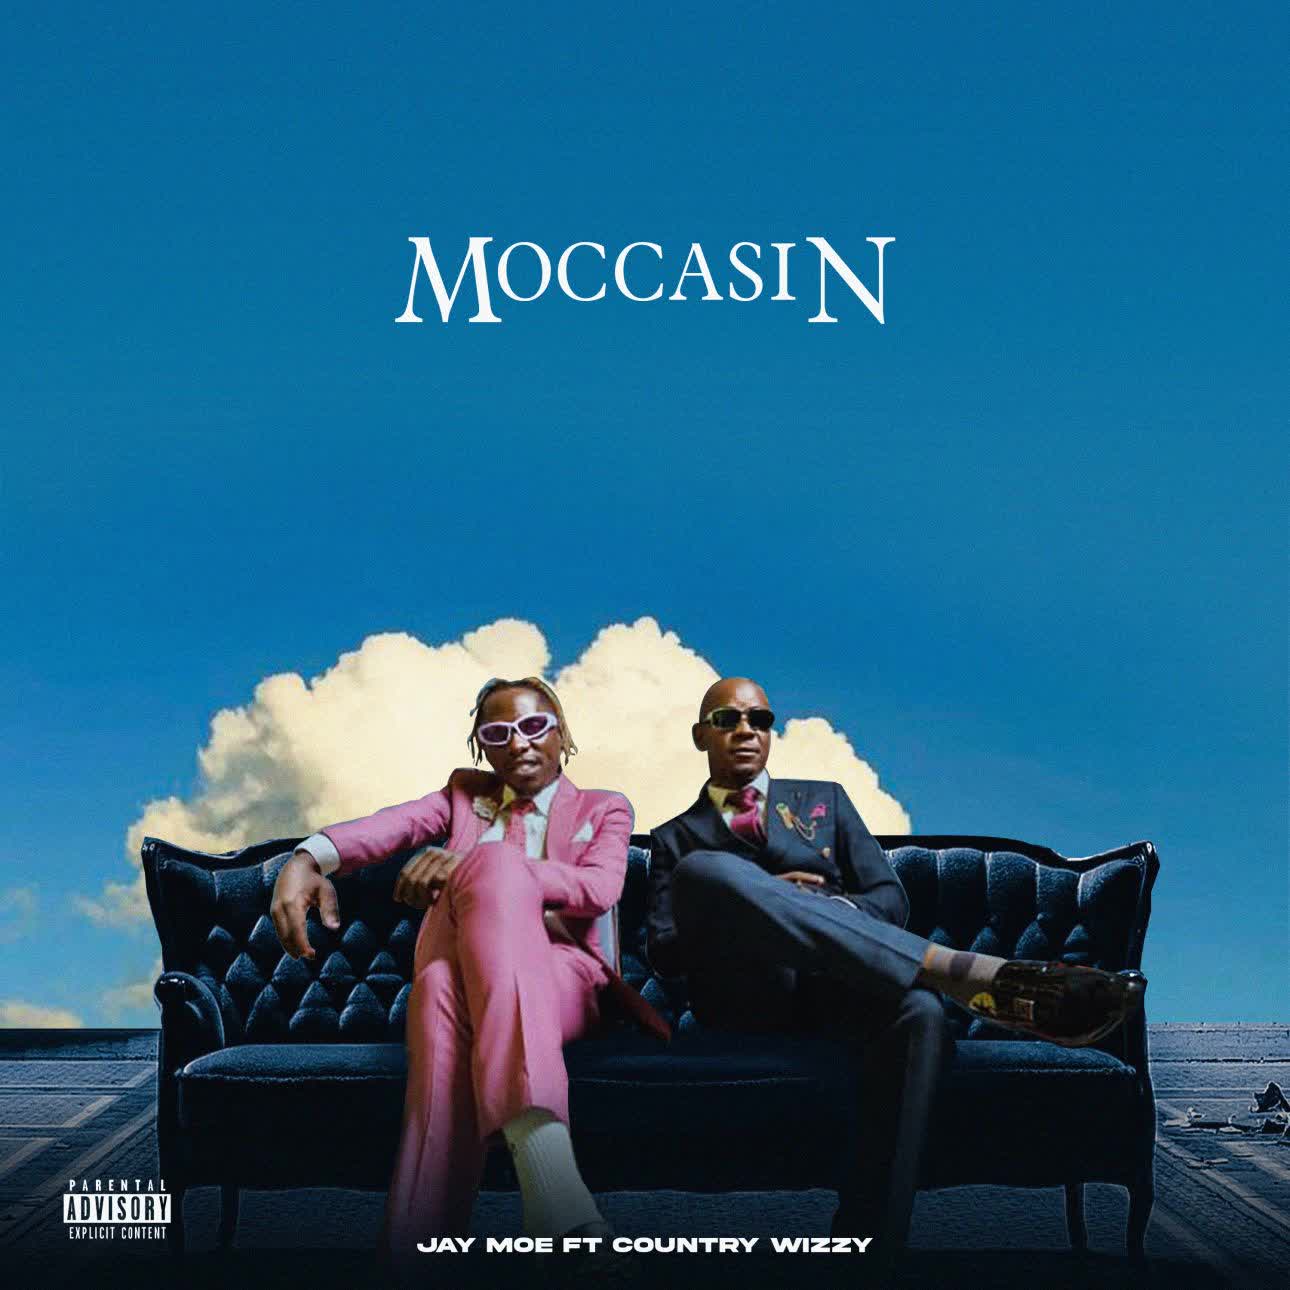  Jay Moe Ft. Country Wizzy – Moccasin